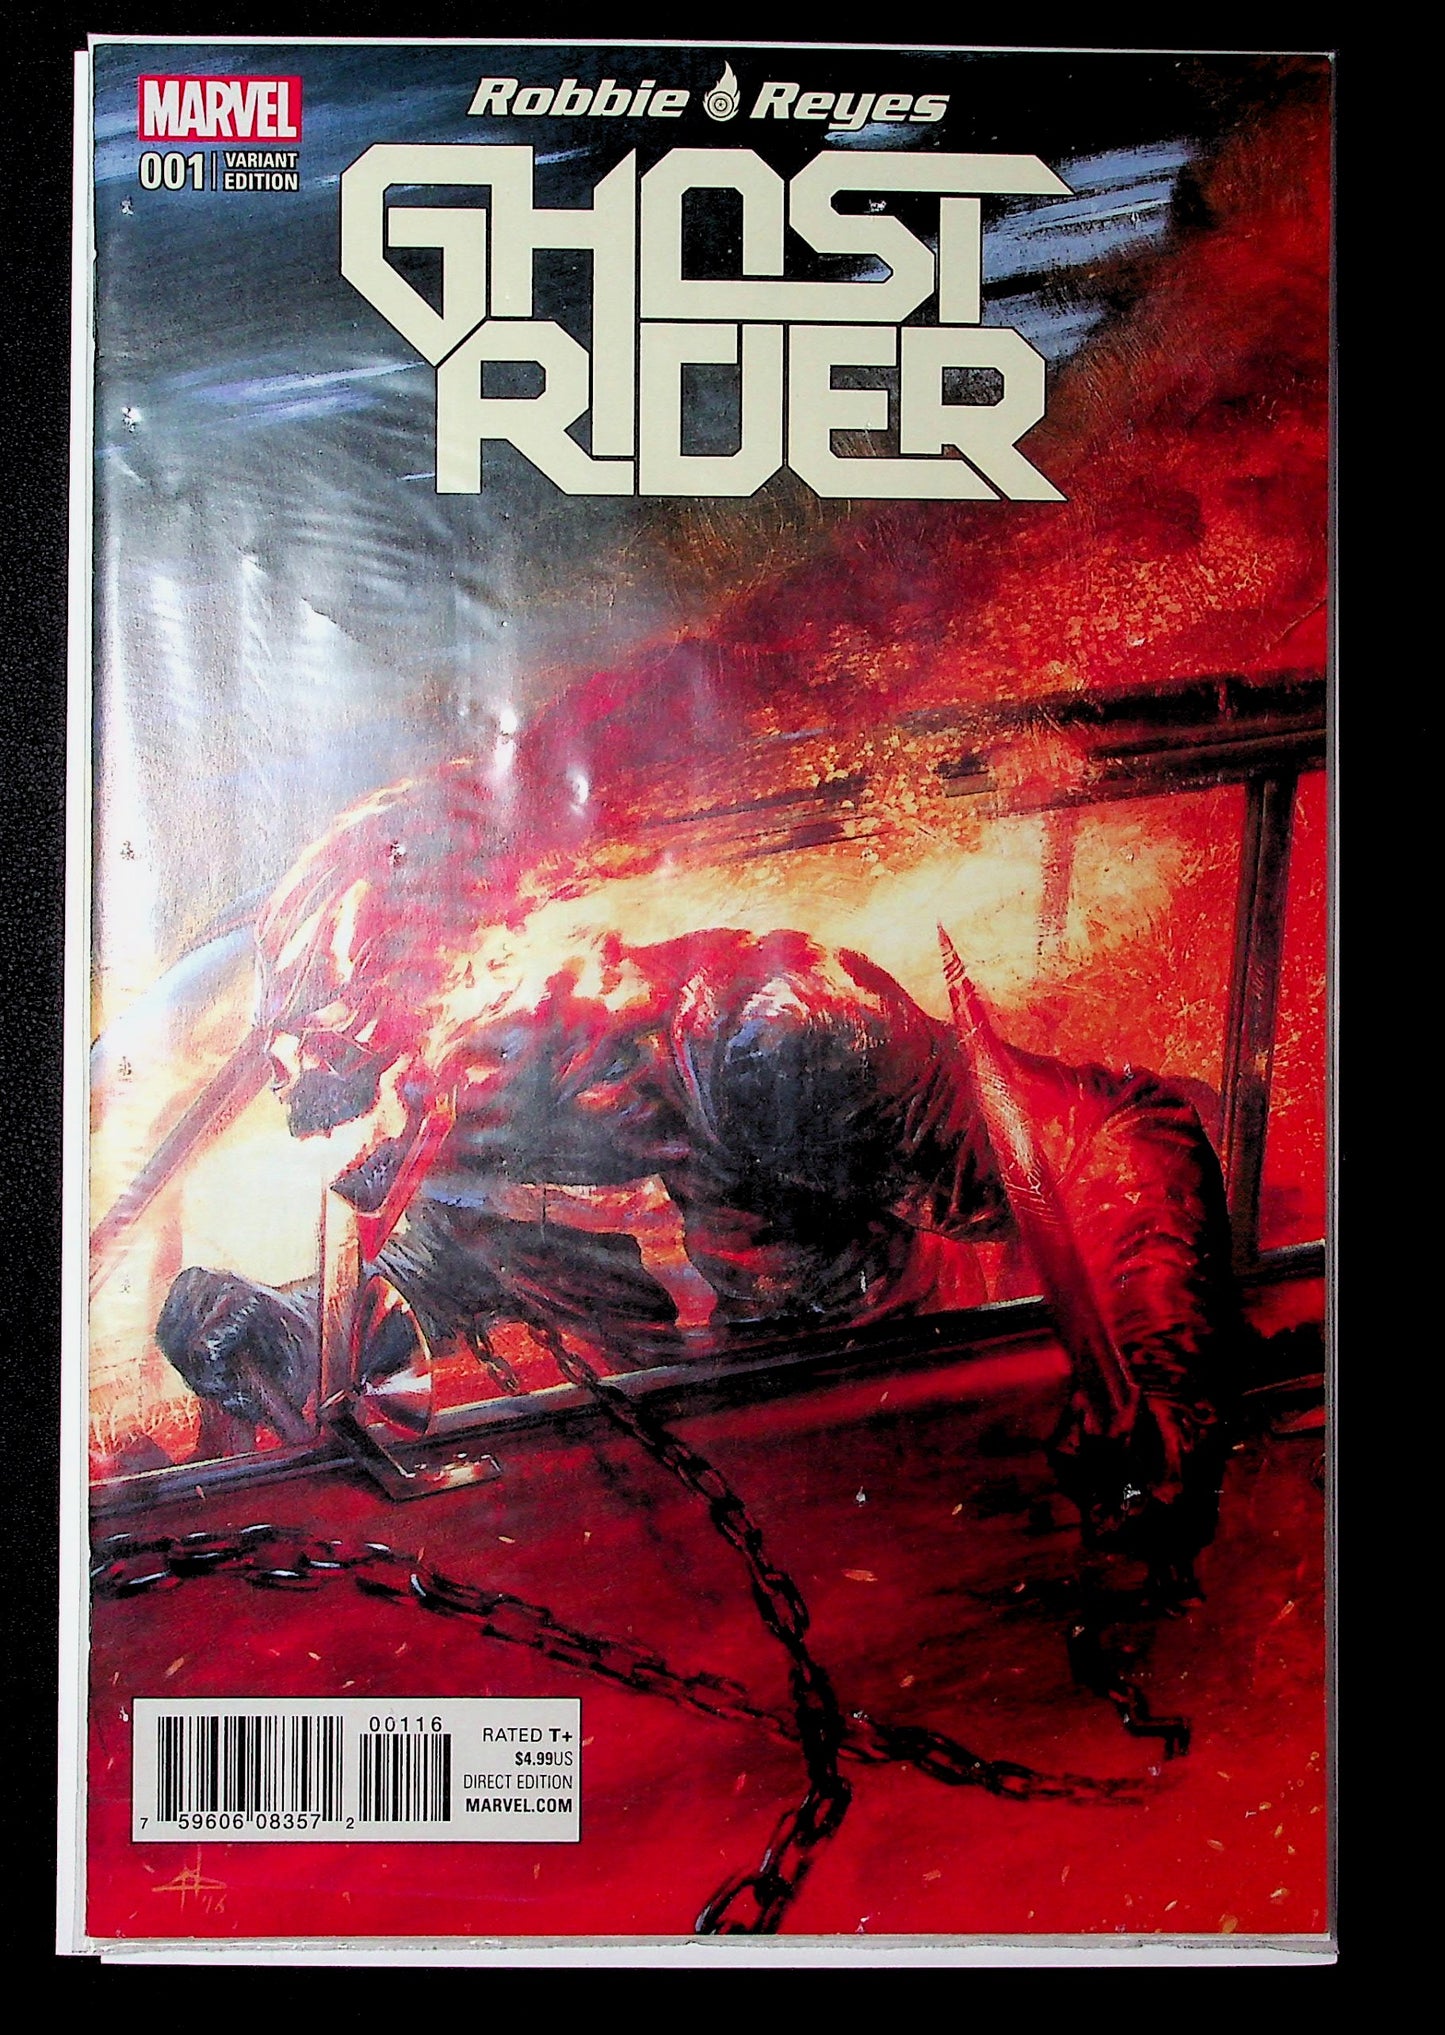 GHOST RIDER #1 - GABRIELE DELL'OTTO TRADE VARIANT EXCLUSIVE COLOR NM+